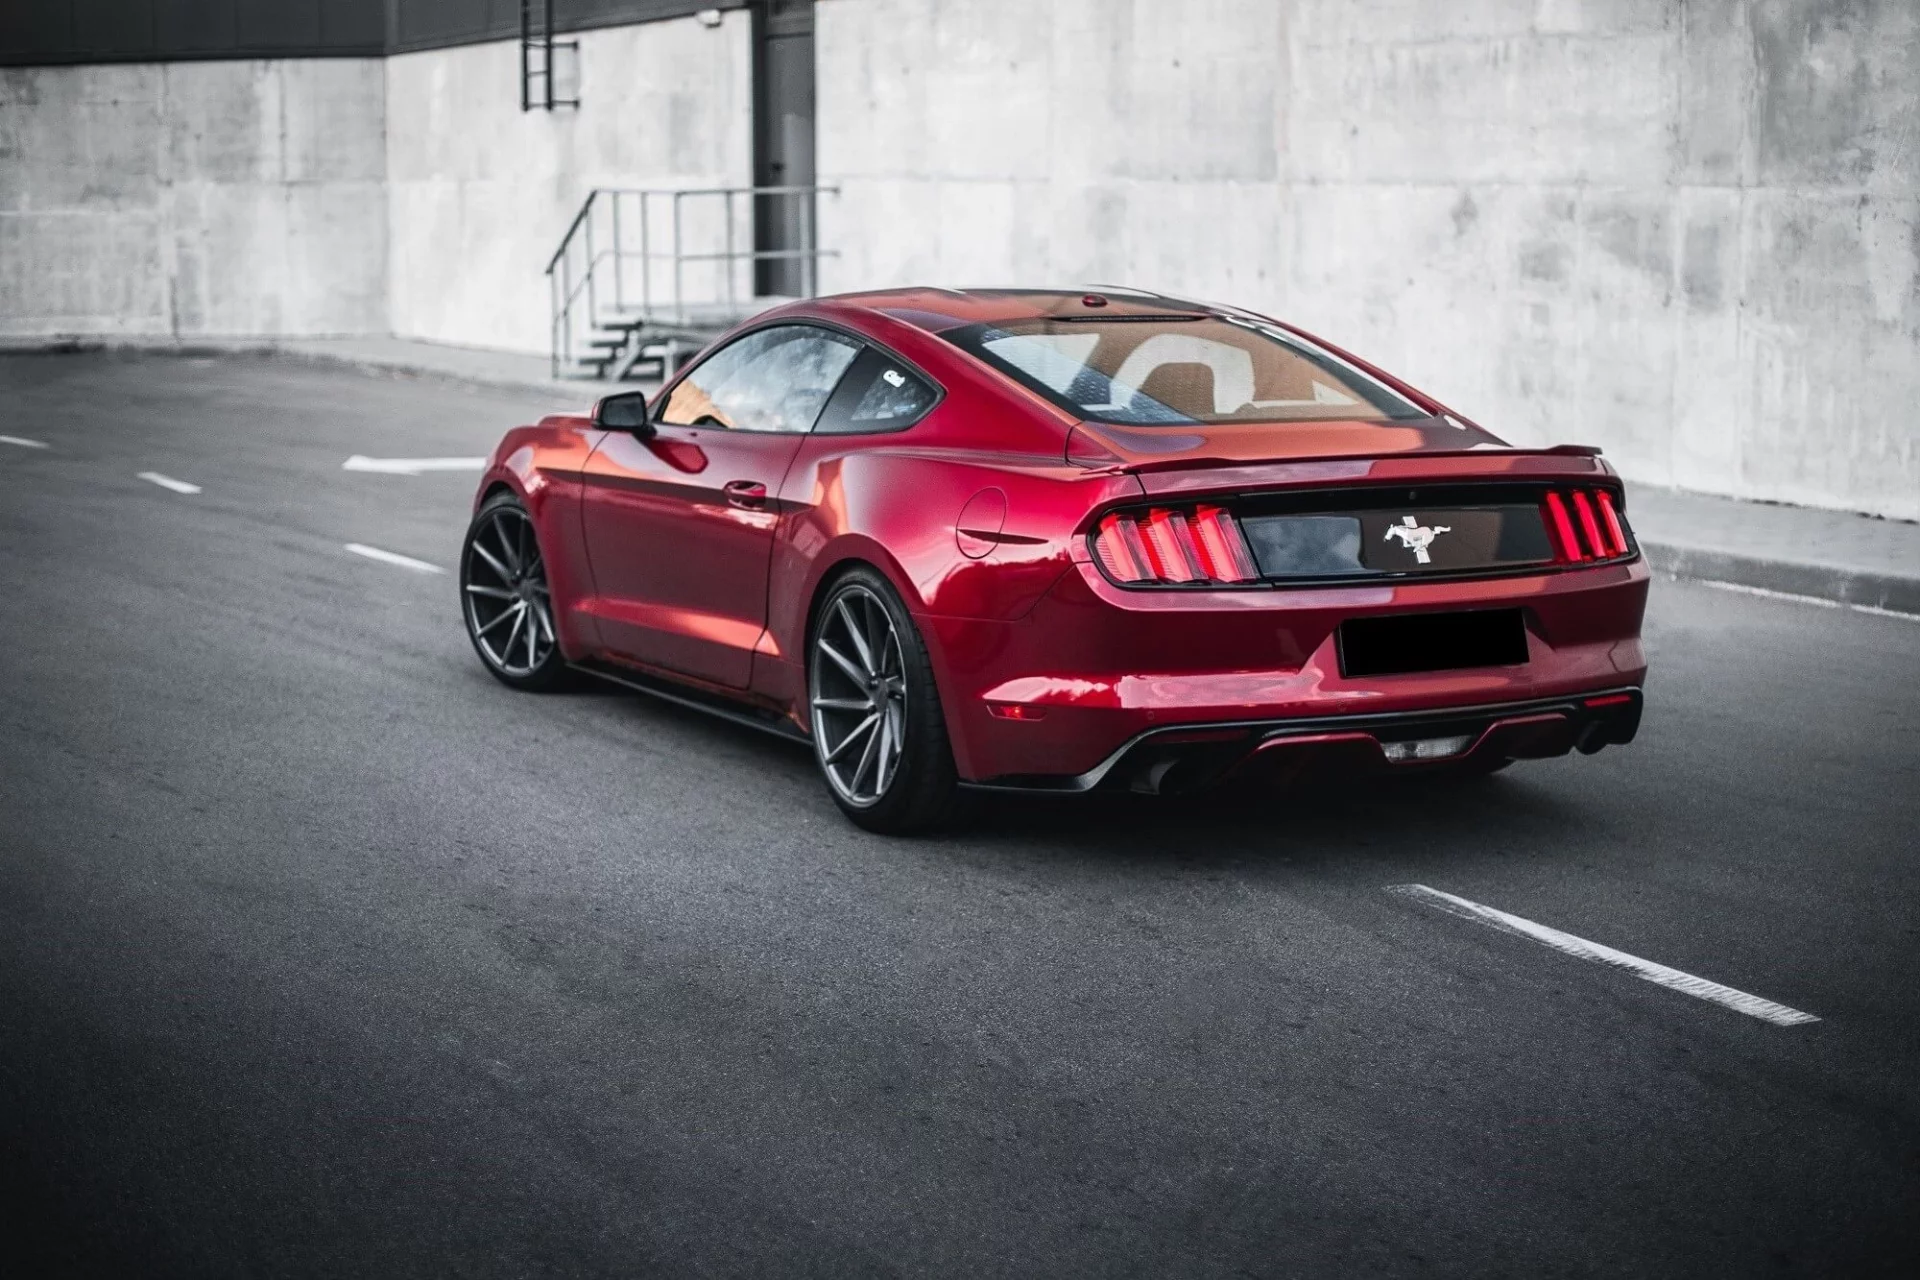 Ford Mustang Coupe Rojo